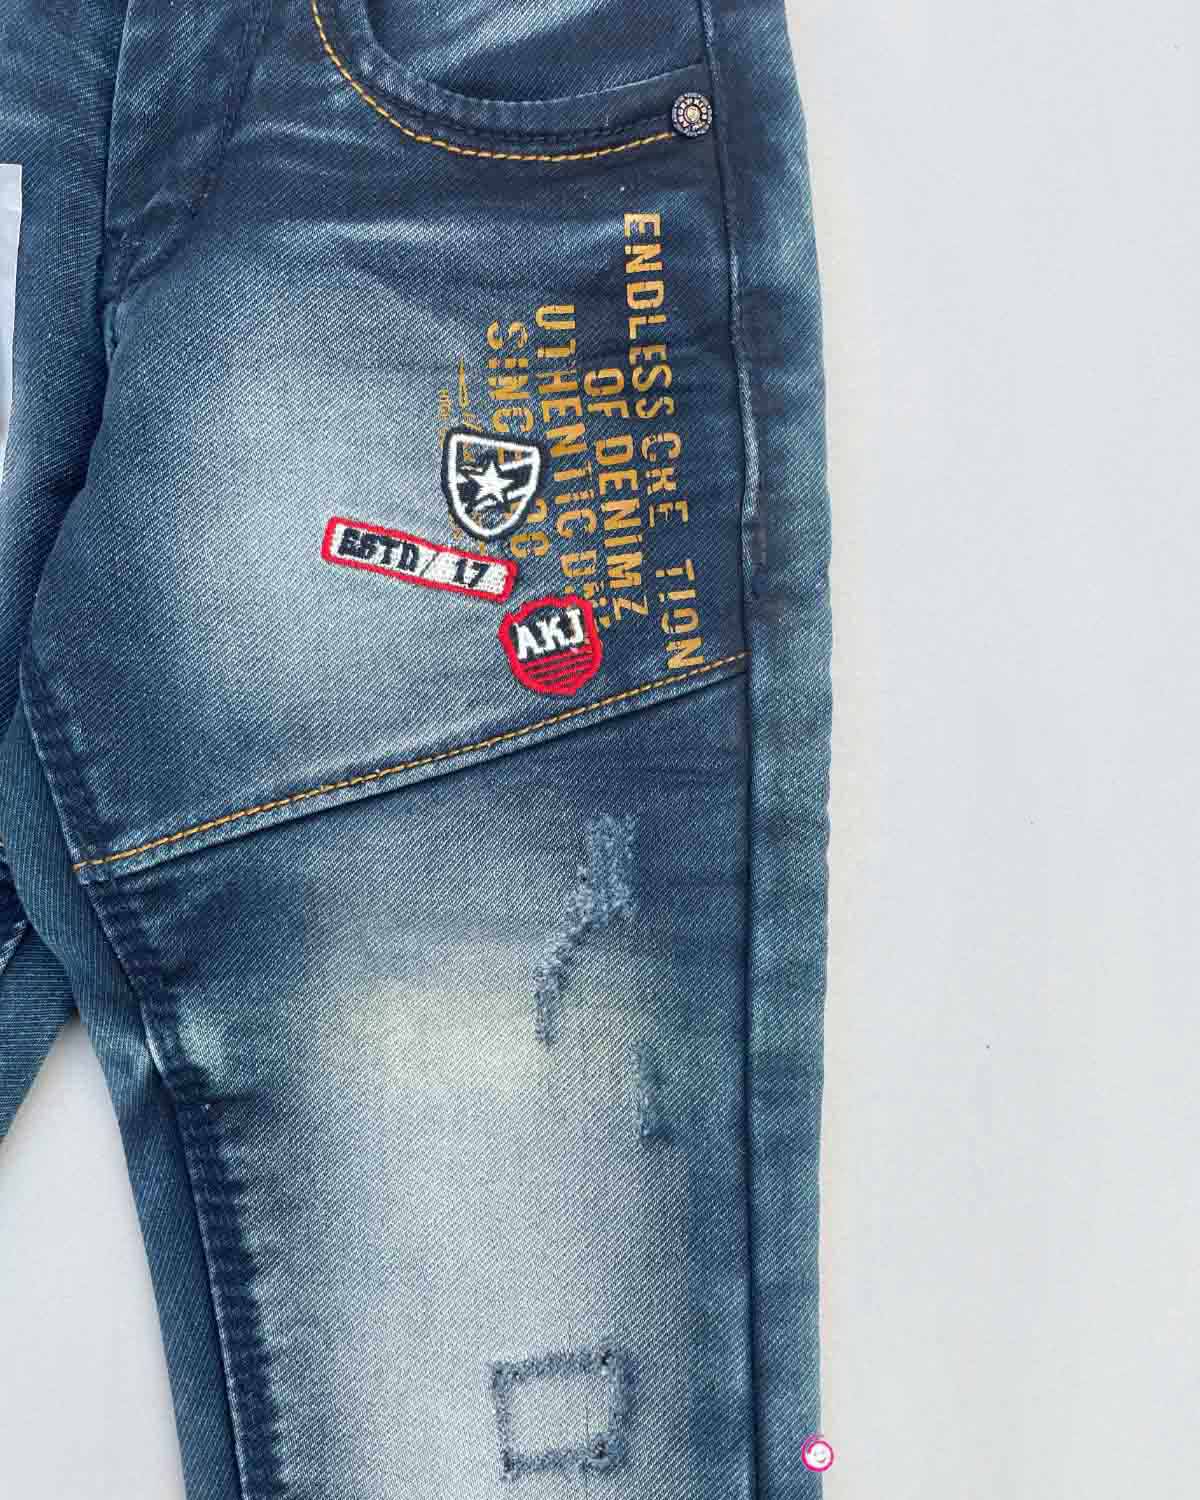 New and Used Boys' Jeans | Berri Kids Resale Boutique